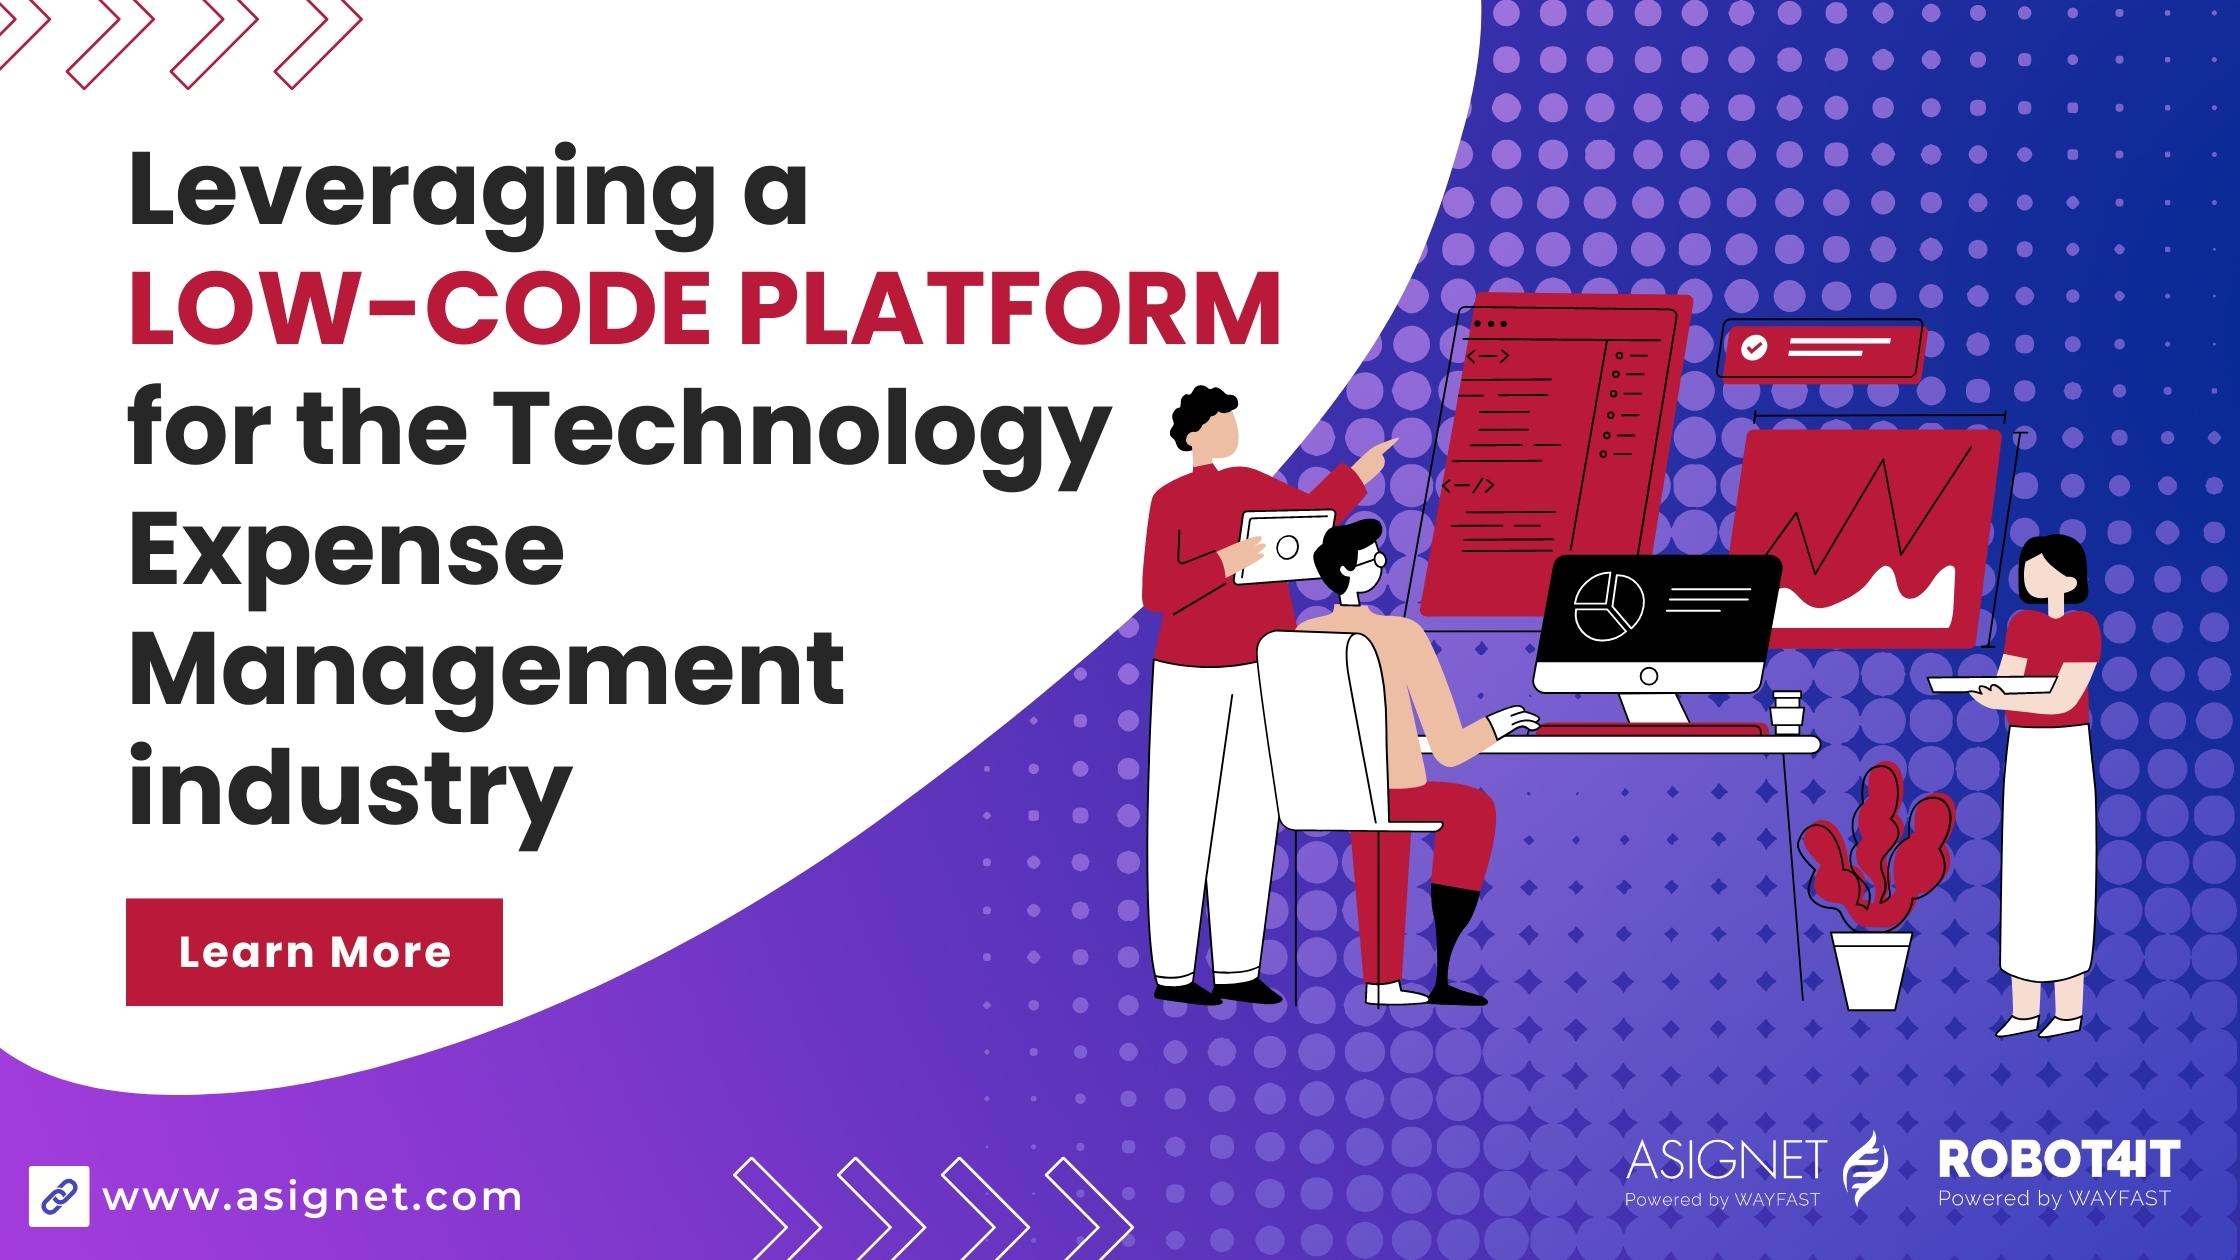 Leveraging a low-code platform for the Technology Expense Management industry - Asignet